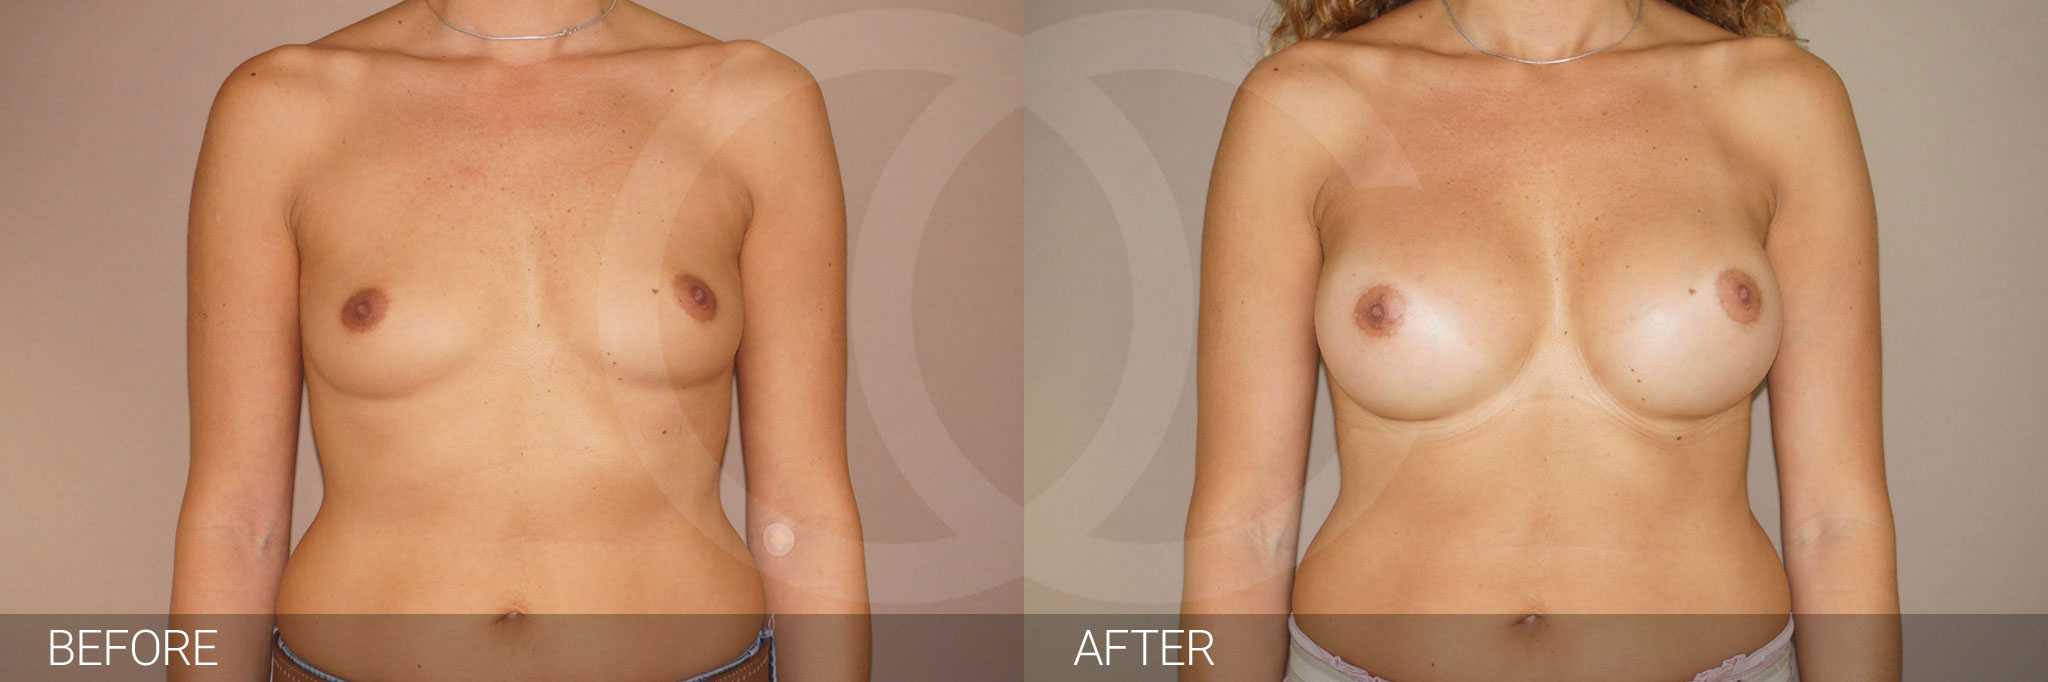 Breast Augmentation Silicone Implants ante/post-op I